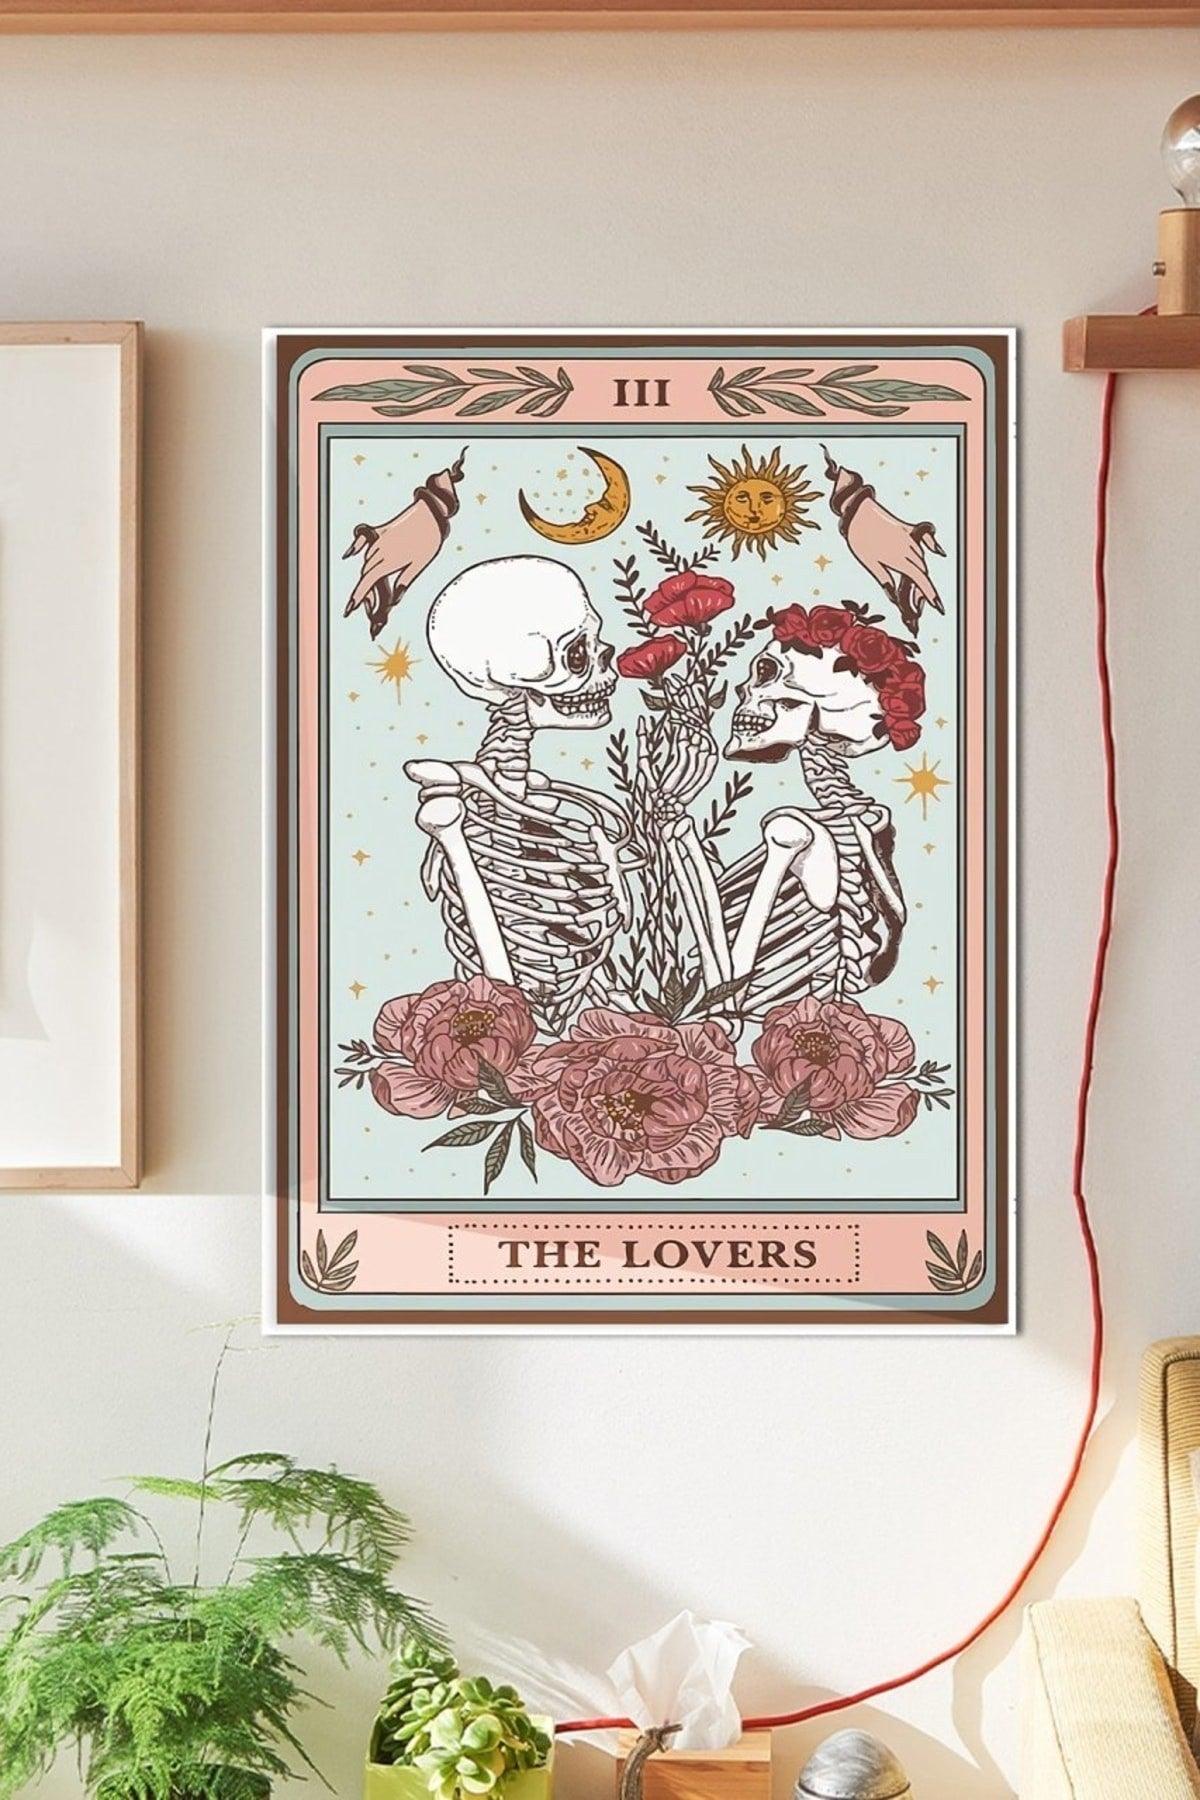 The Lovers Wall Poster Large 45x30 Cm - Swordslife